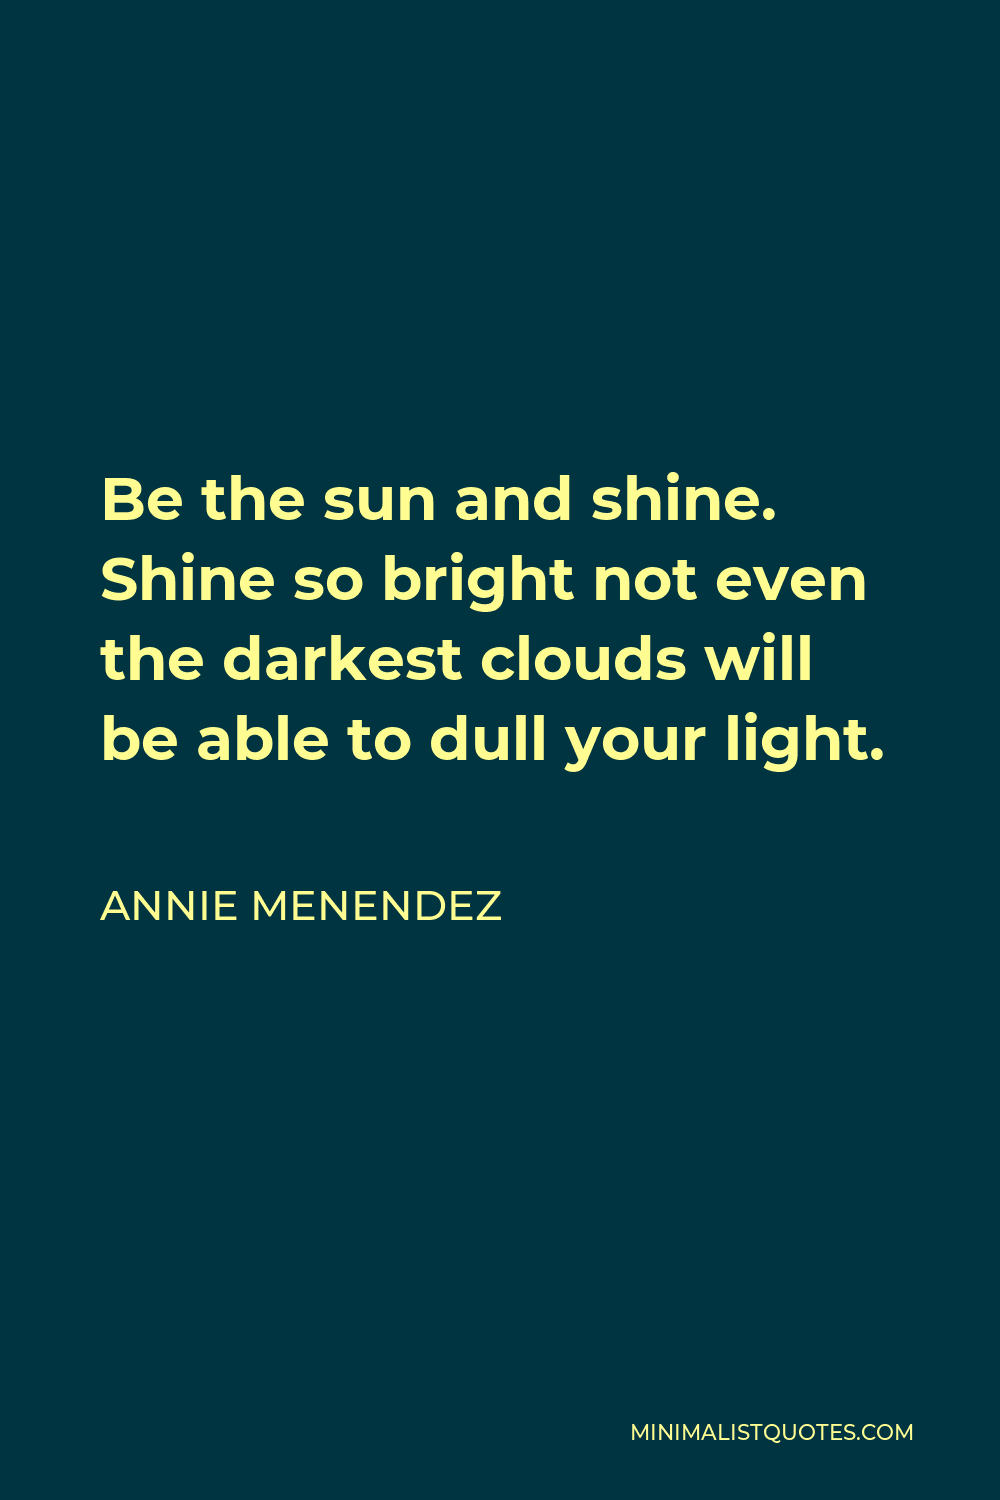 Annie Menendez Quote - Be the sun and shine. Shine so bright not even the darkest clouds will be able to dull your light.